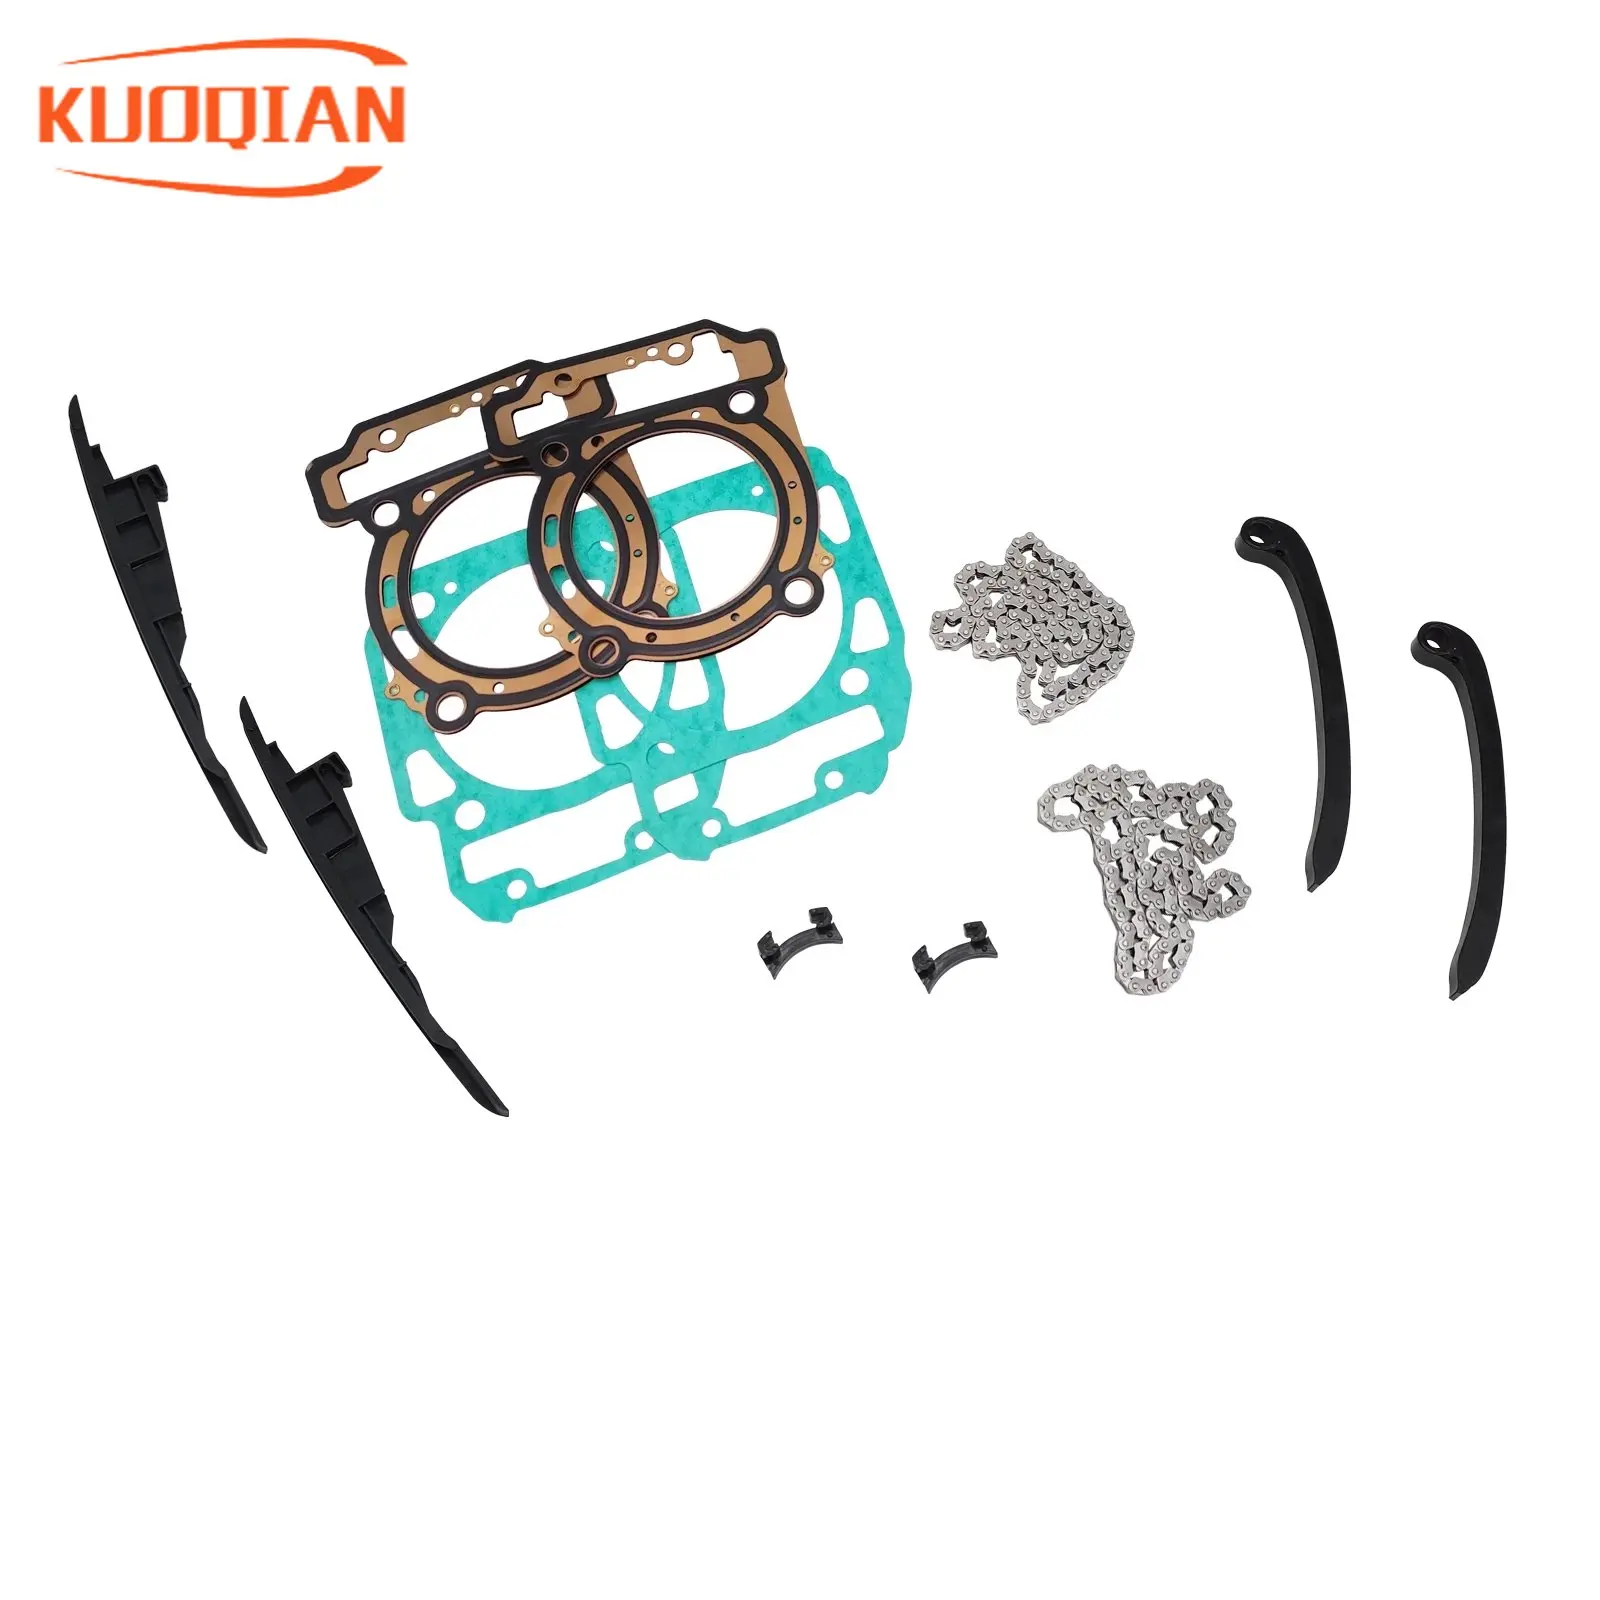 2Set Timing Chain, Guide Plate, Cylinder Gasket ， Repair Kit For CAN-AM BRP 800 ATV UTV QUAD BIKE